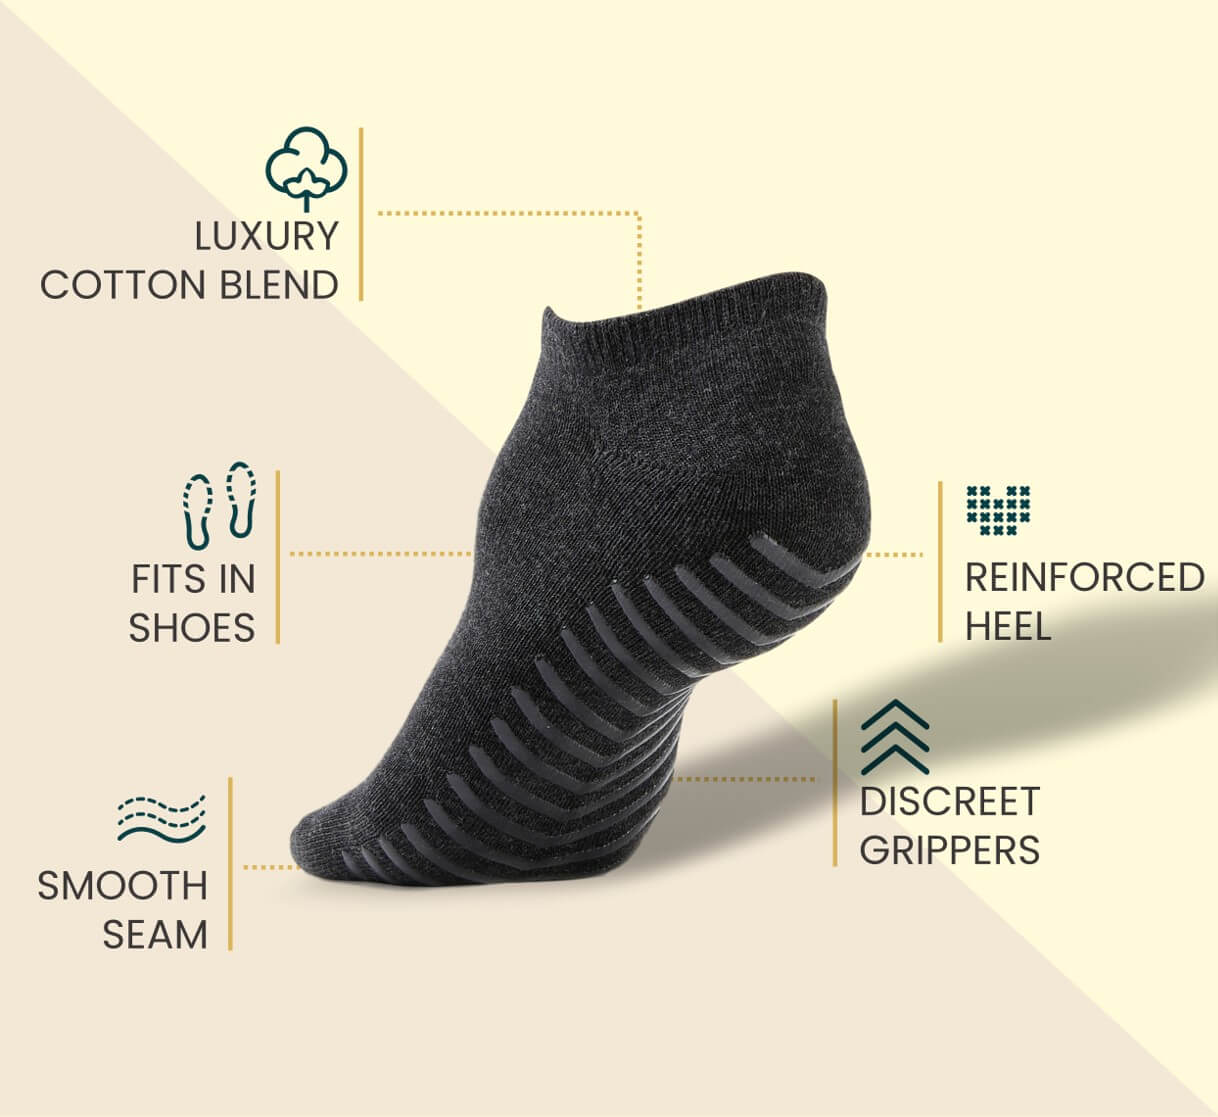 socks with grippers for elderly